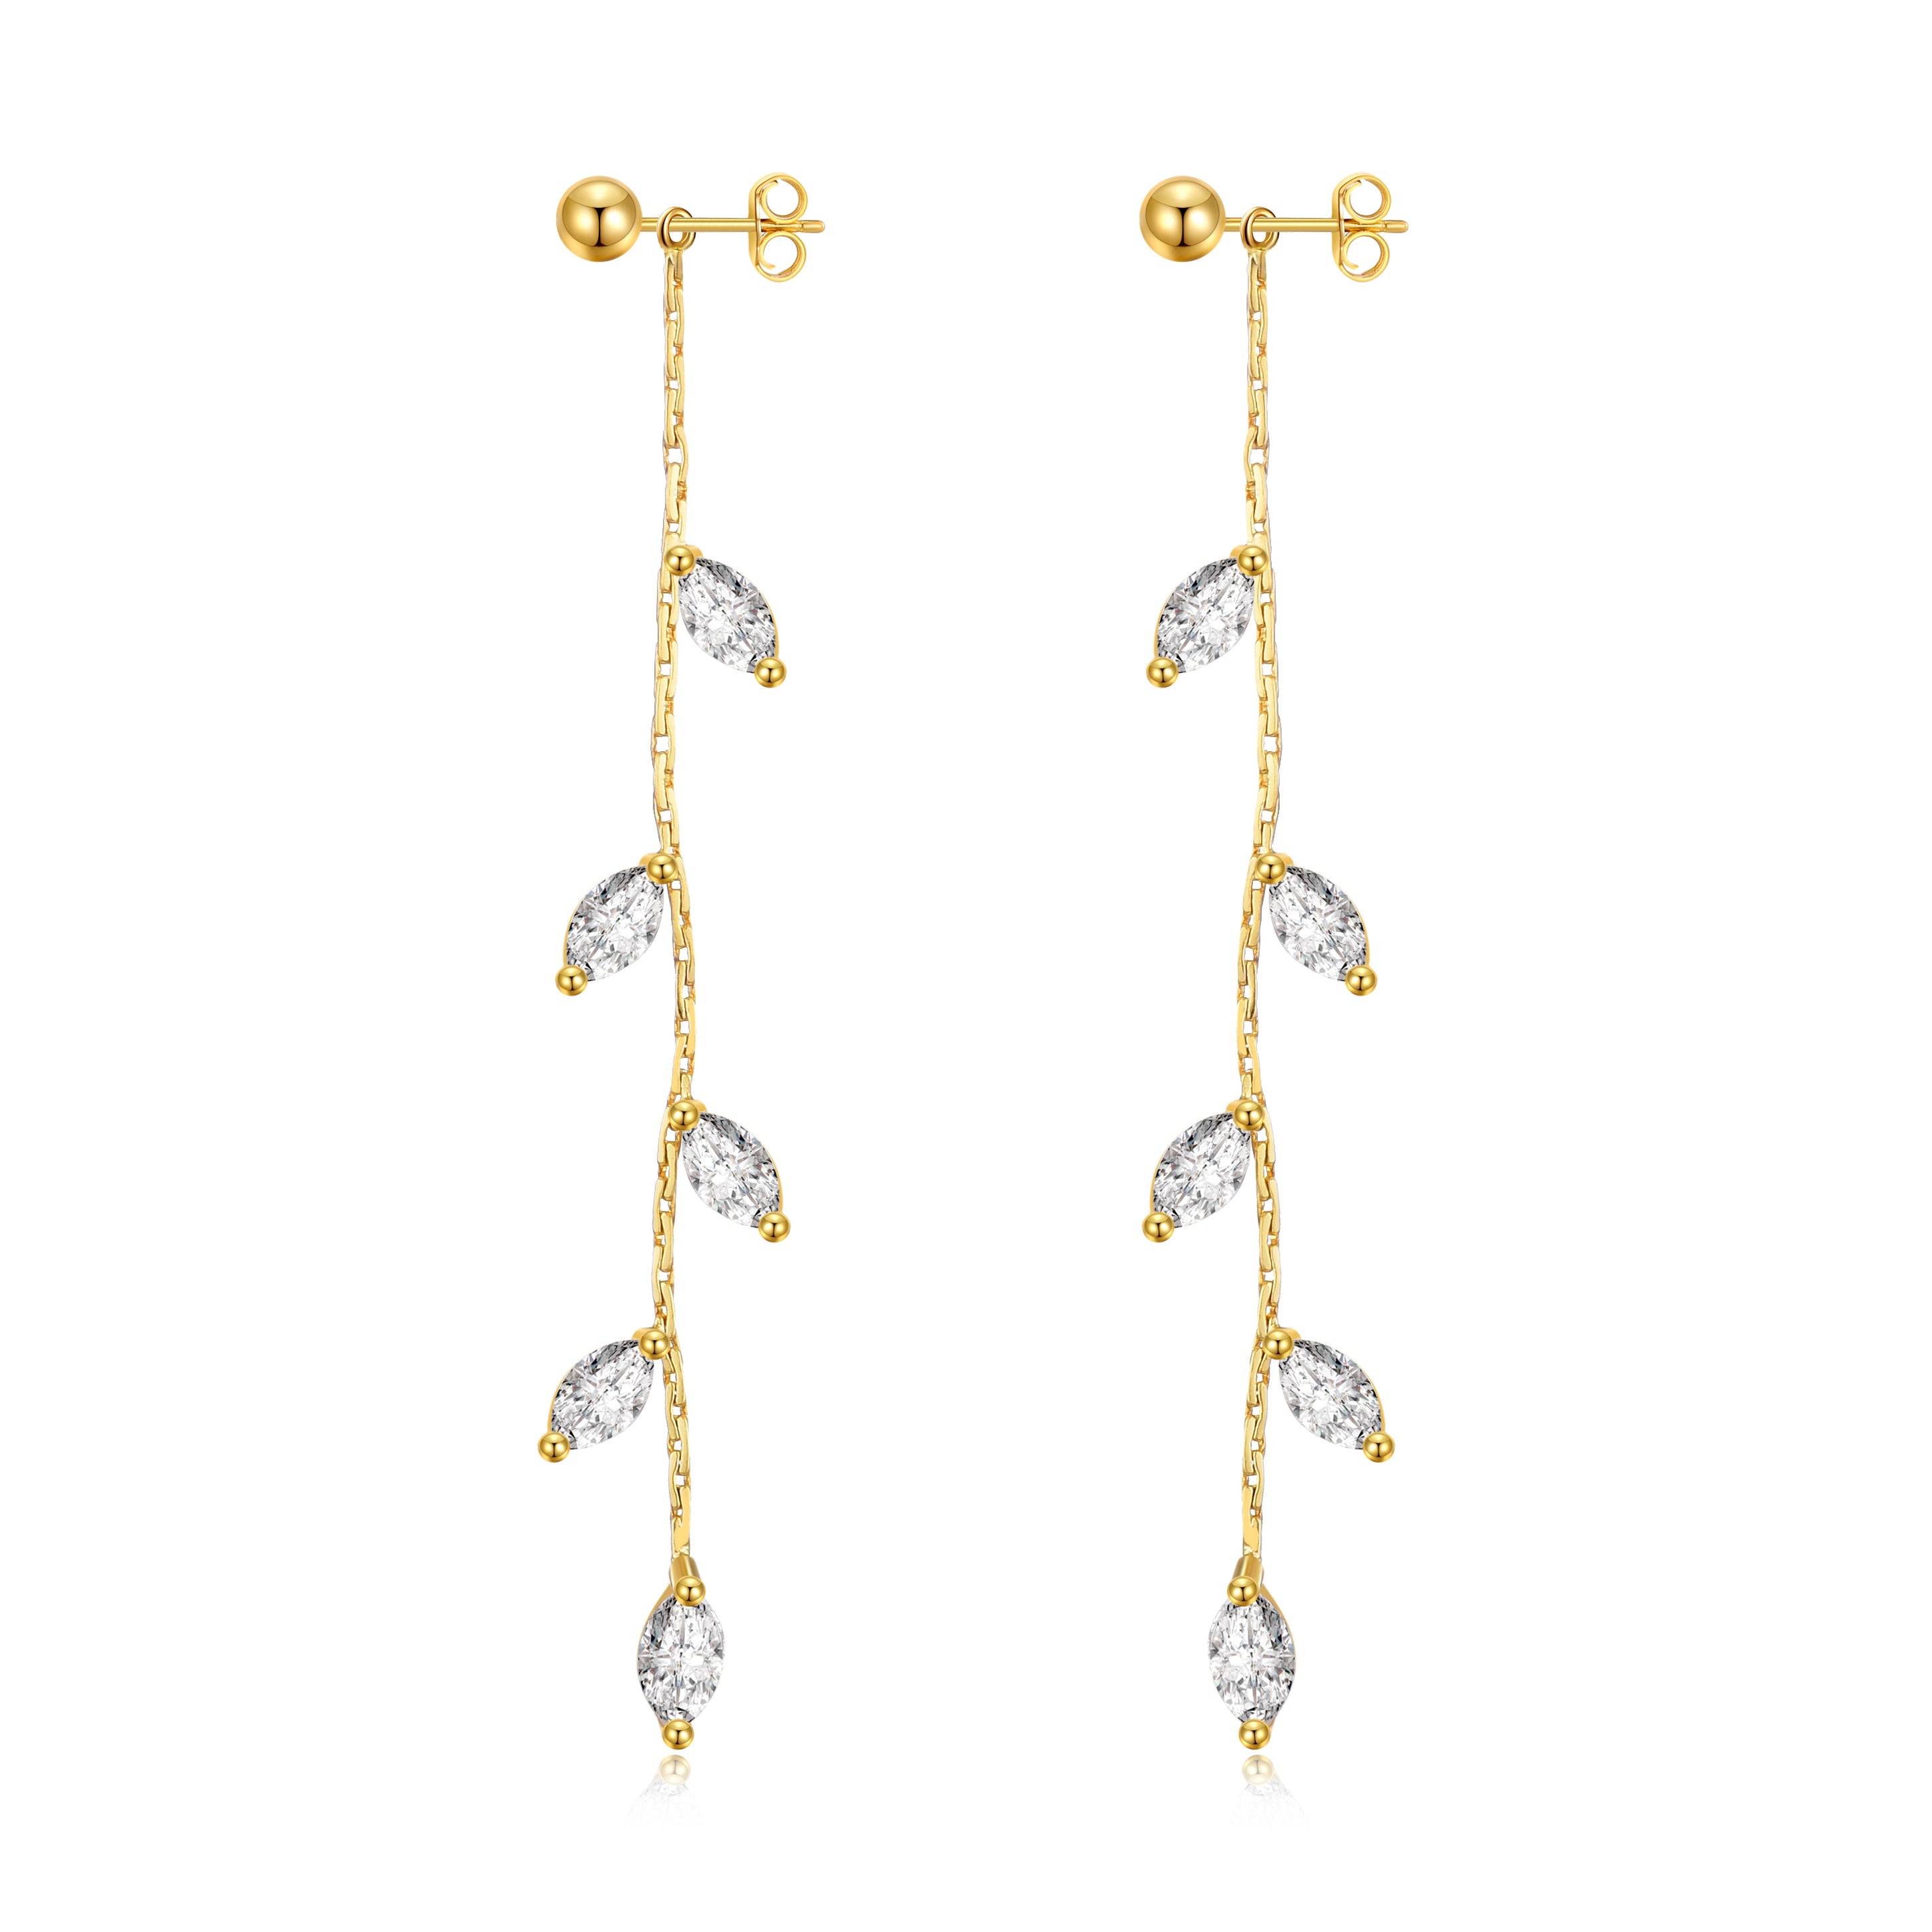 Gold Plated Leaf Dangle Earrings Created with Zircondia® Crystals by Philip Jones Jewellery